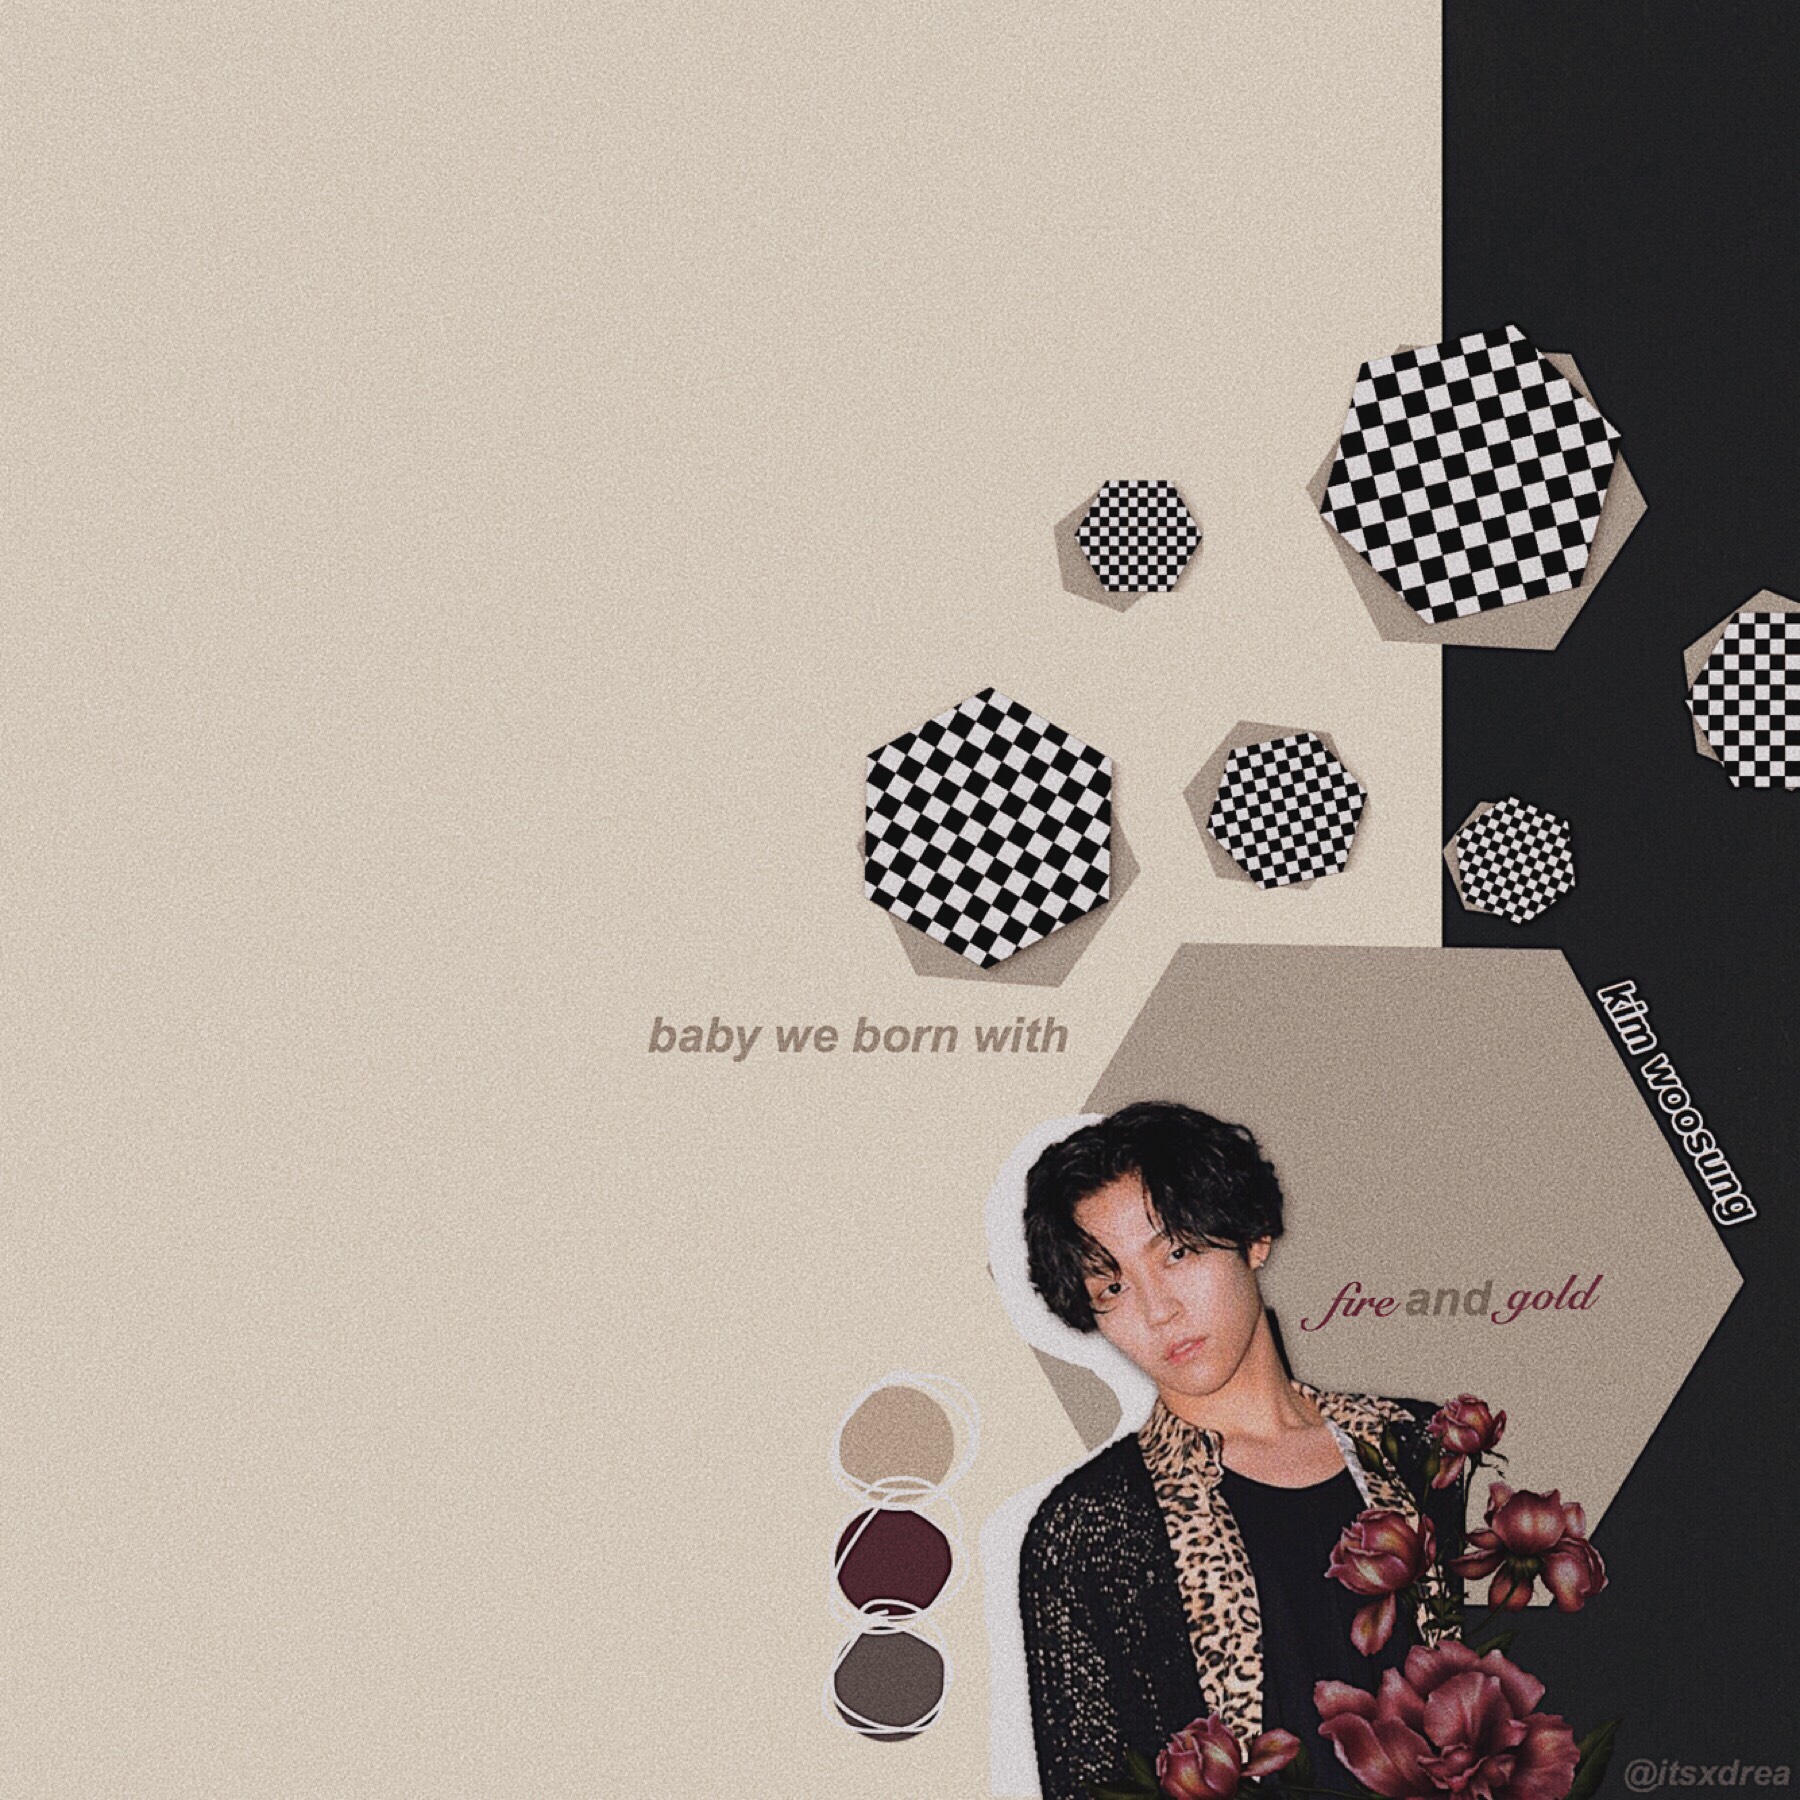 🍪
• kim woosung // the rose •
> edit request for @MinGeniusYoongi <
i hope you like it !! 
sometimes i can’t tell if it’s been over a day since my last post bc i’ve been sleeping too much LOL
(and it may or may not be my bday oop) 